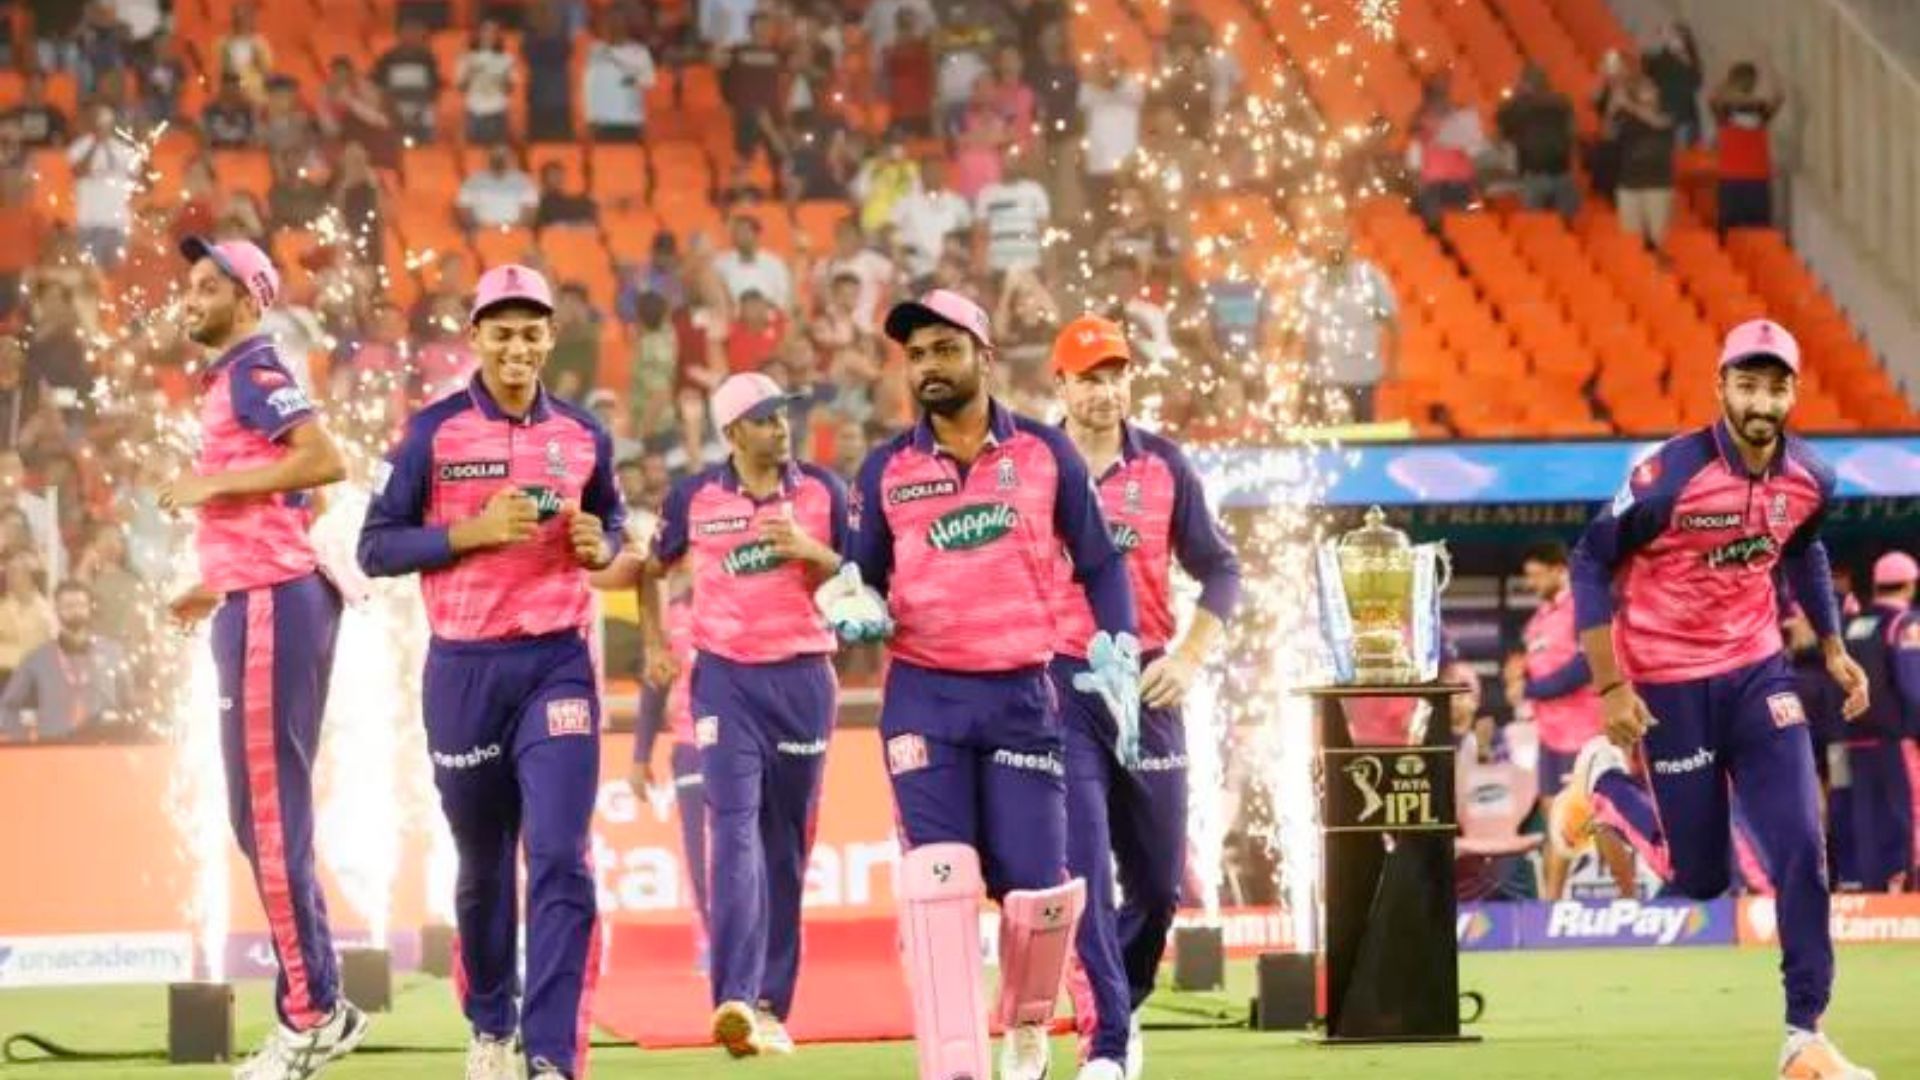 Rajasthan Royals made all the way to the IPL final last year (P.C.:iplt20.com)